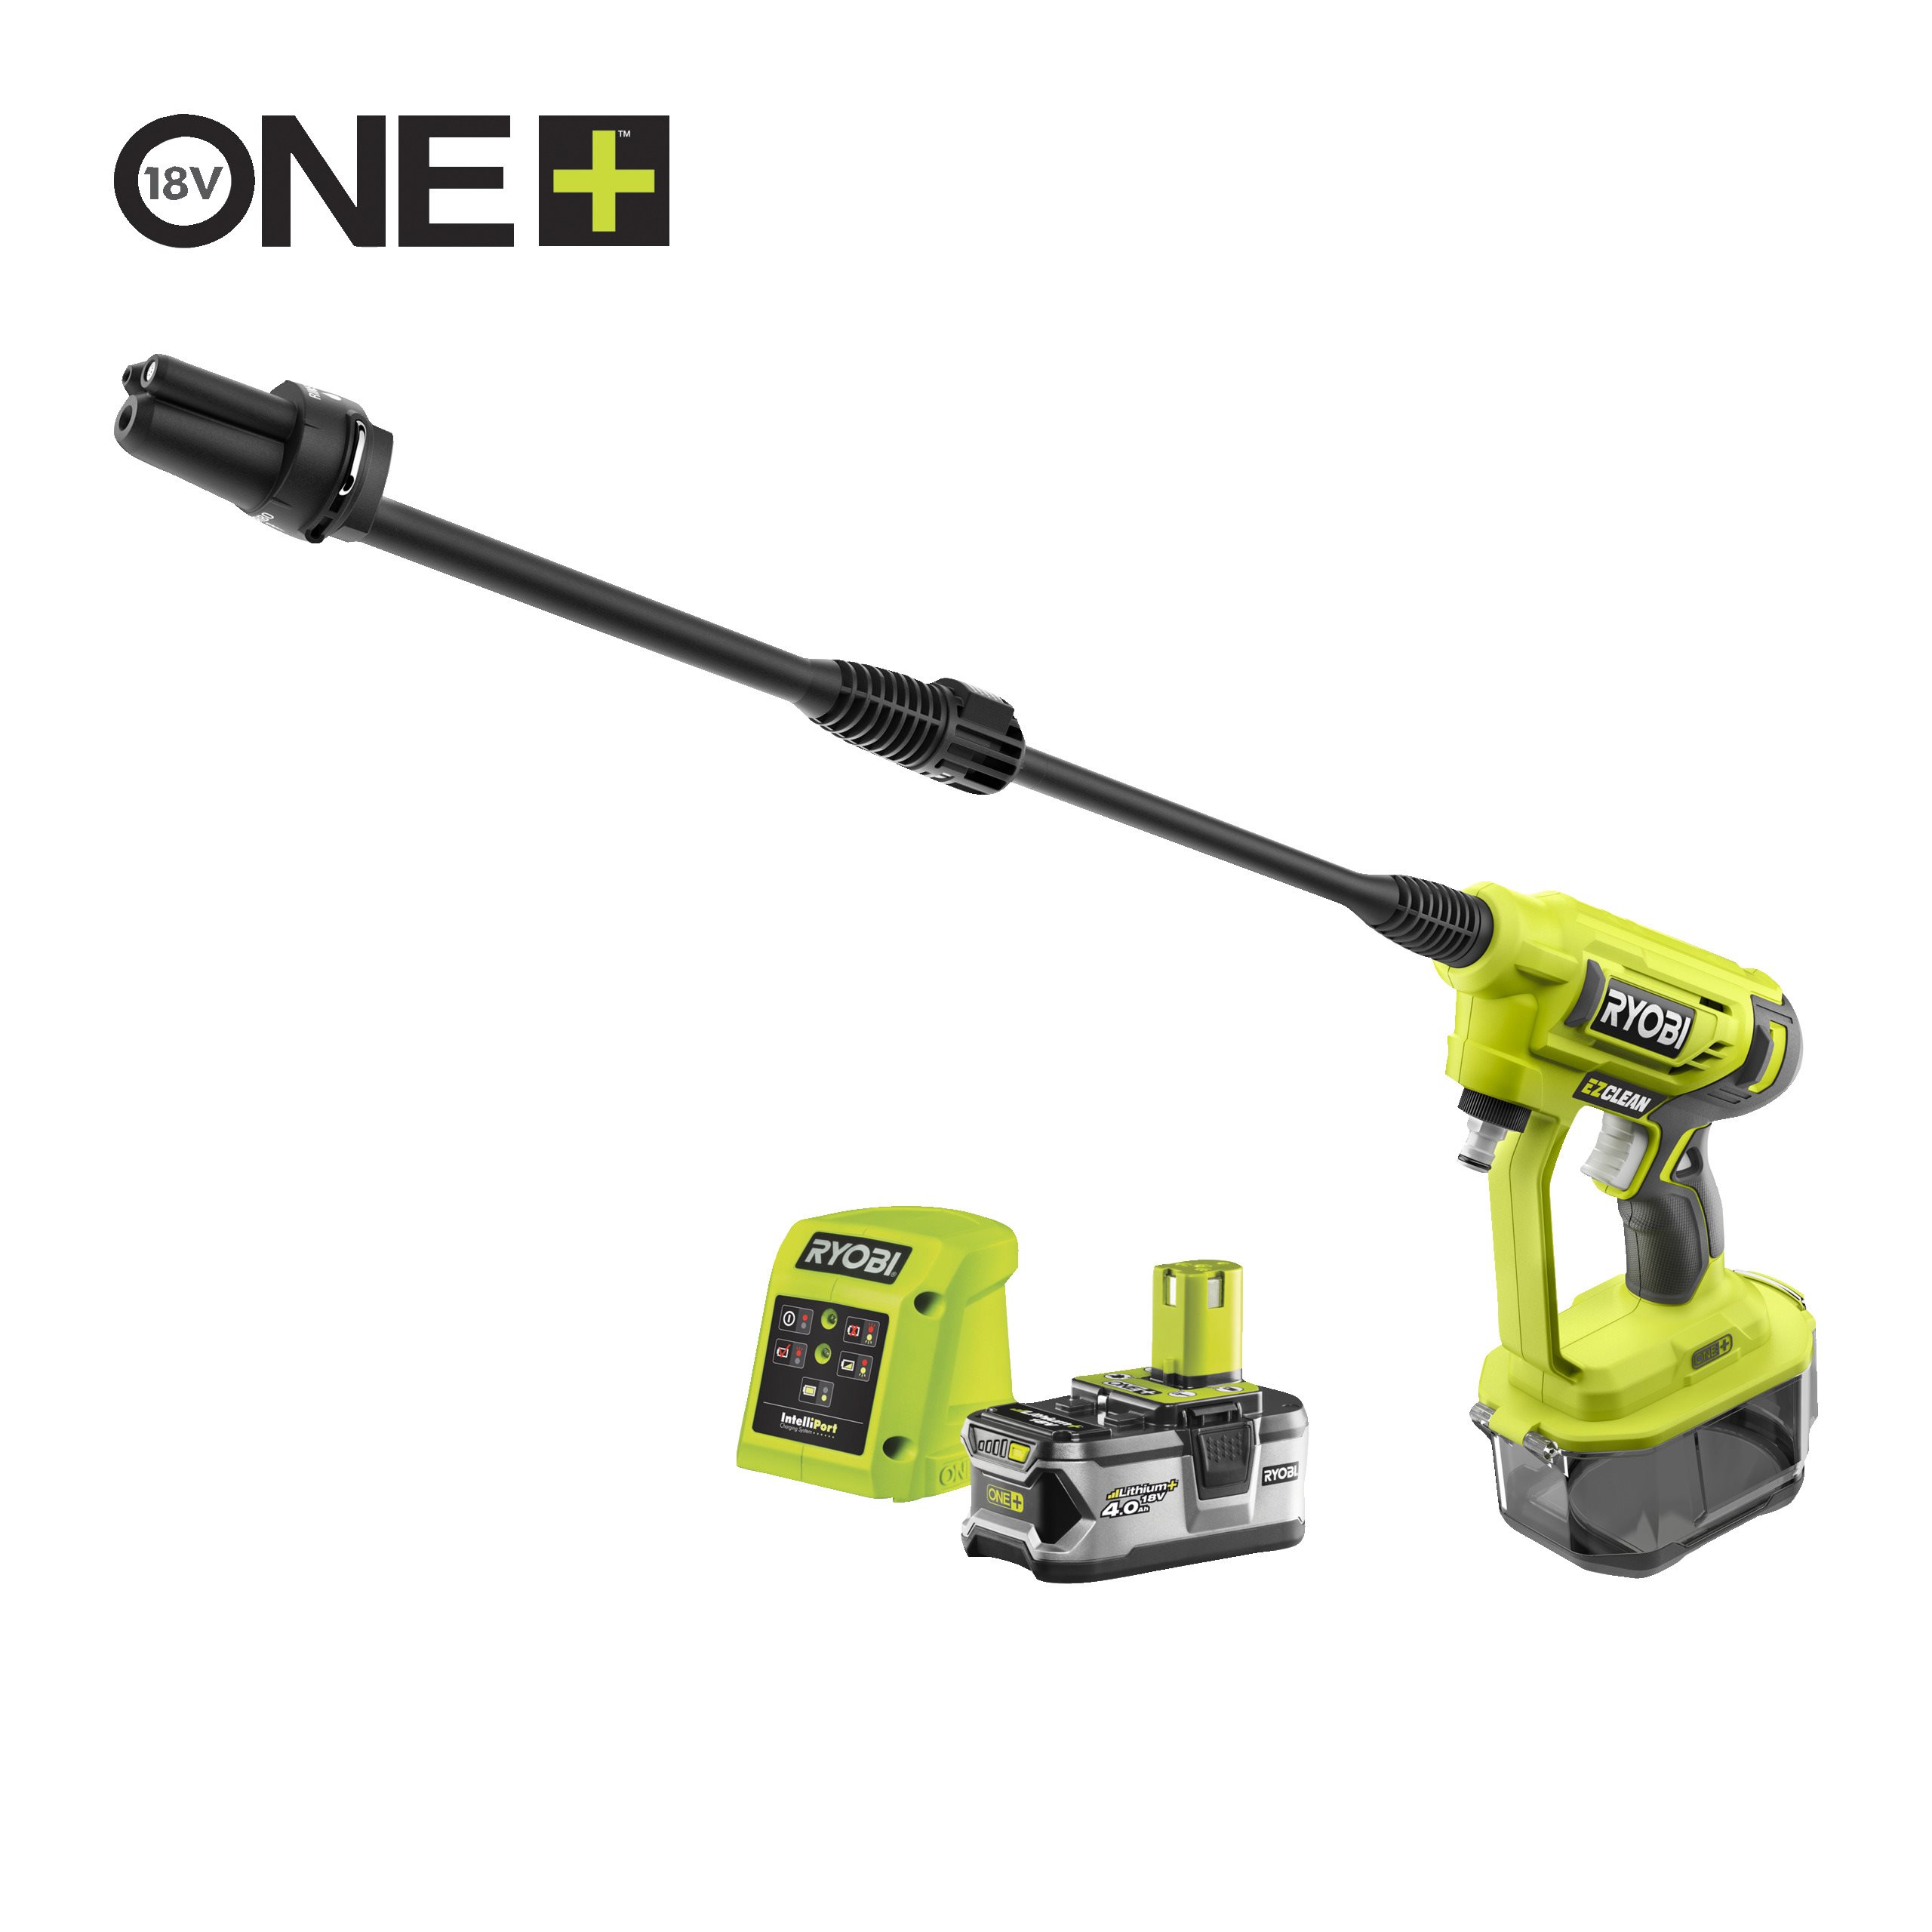 This Ryobi Drill Deal Cuts 22% Off the Price - Hurry! - The Manual